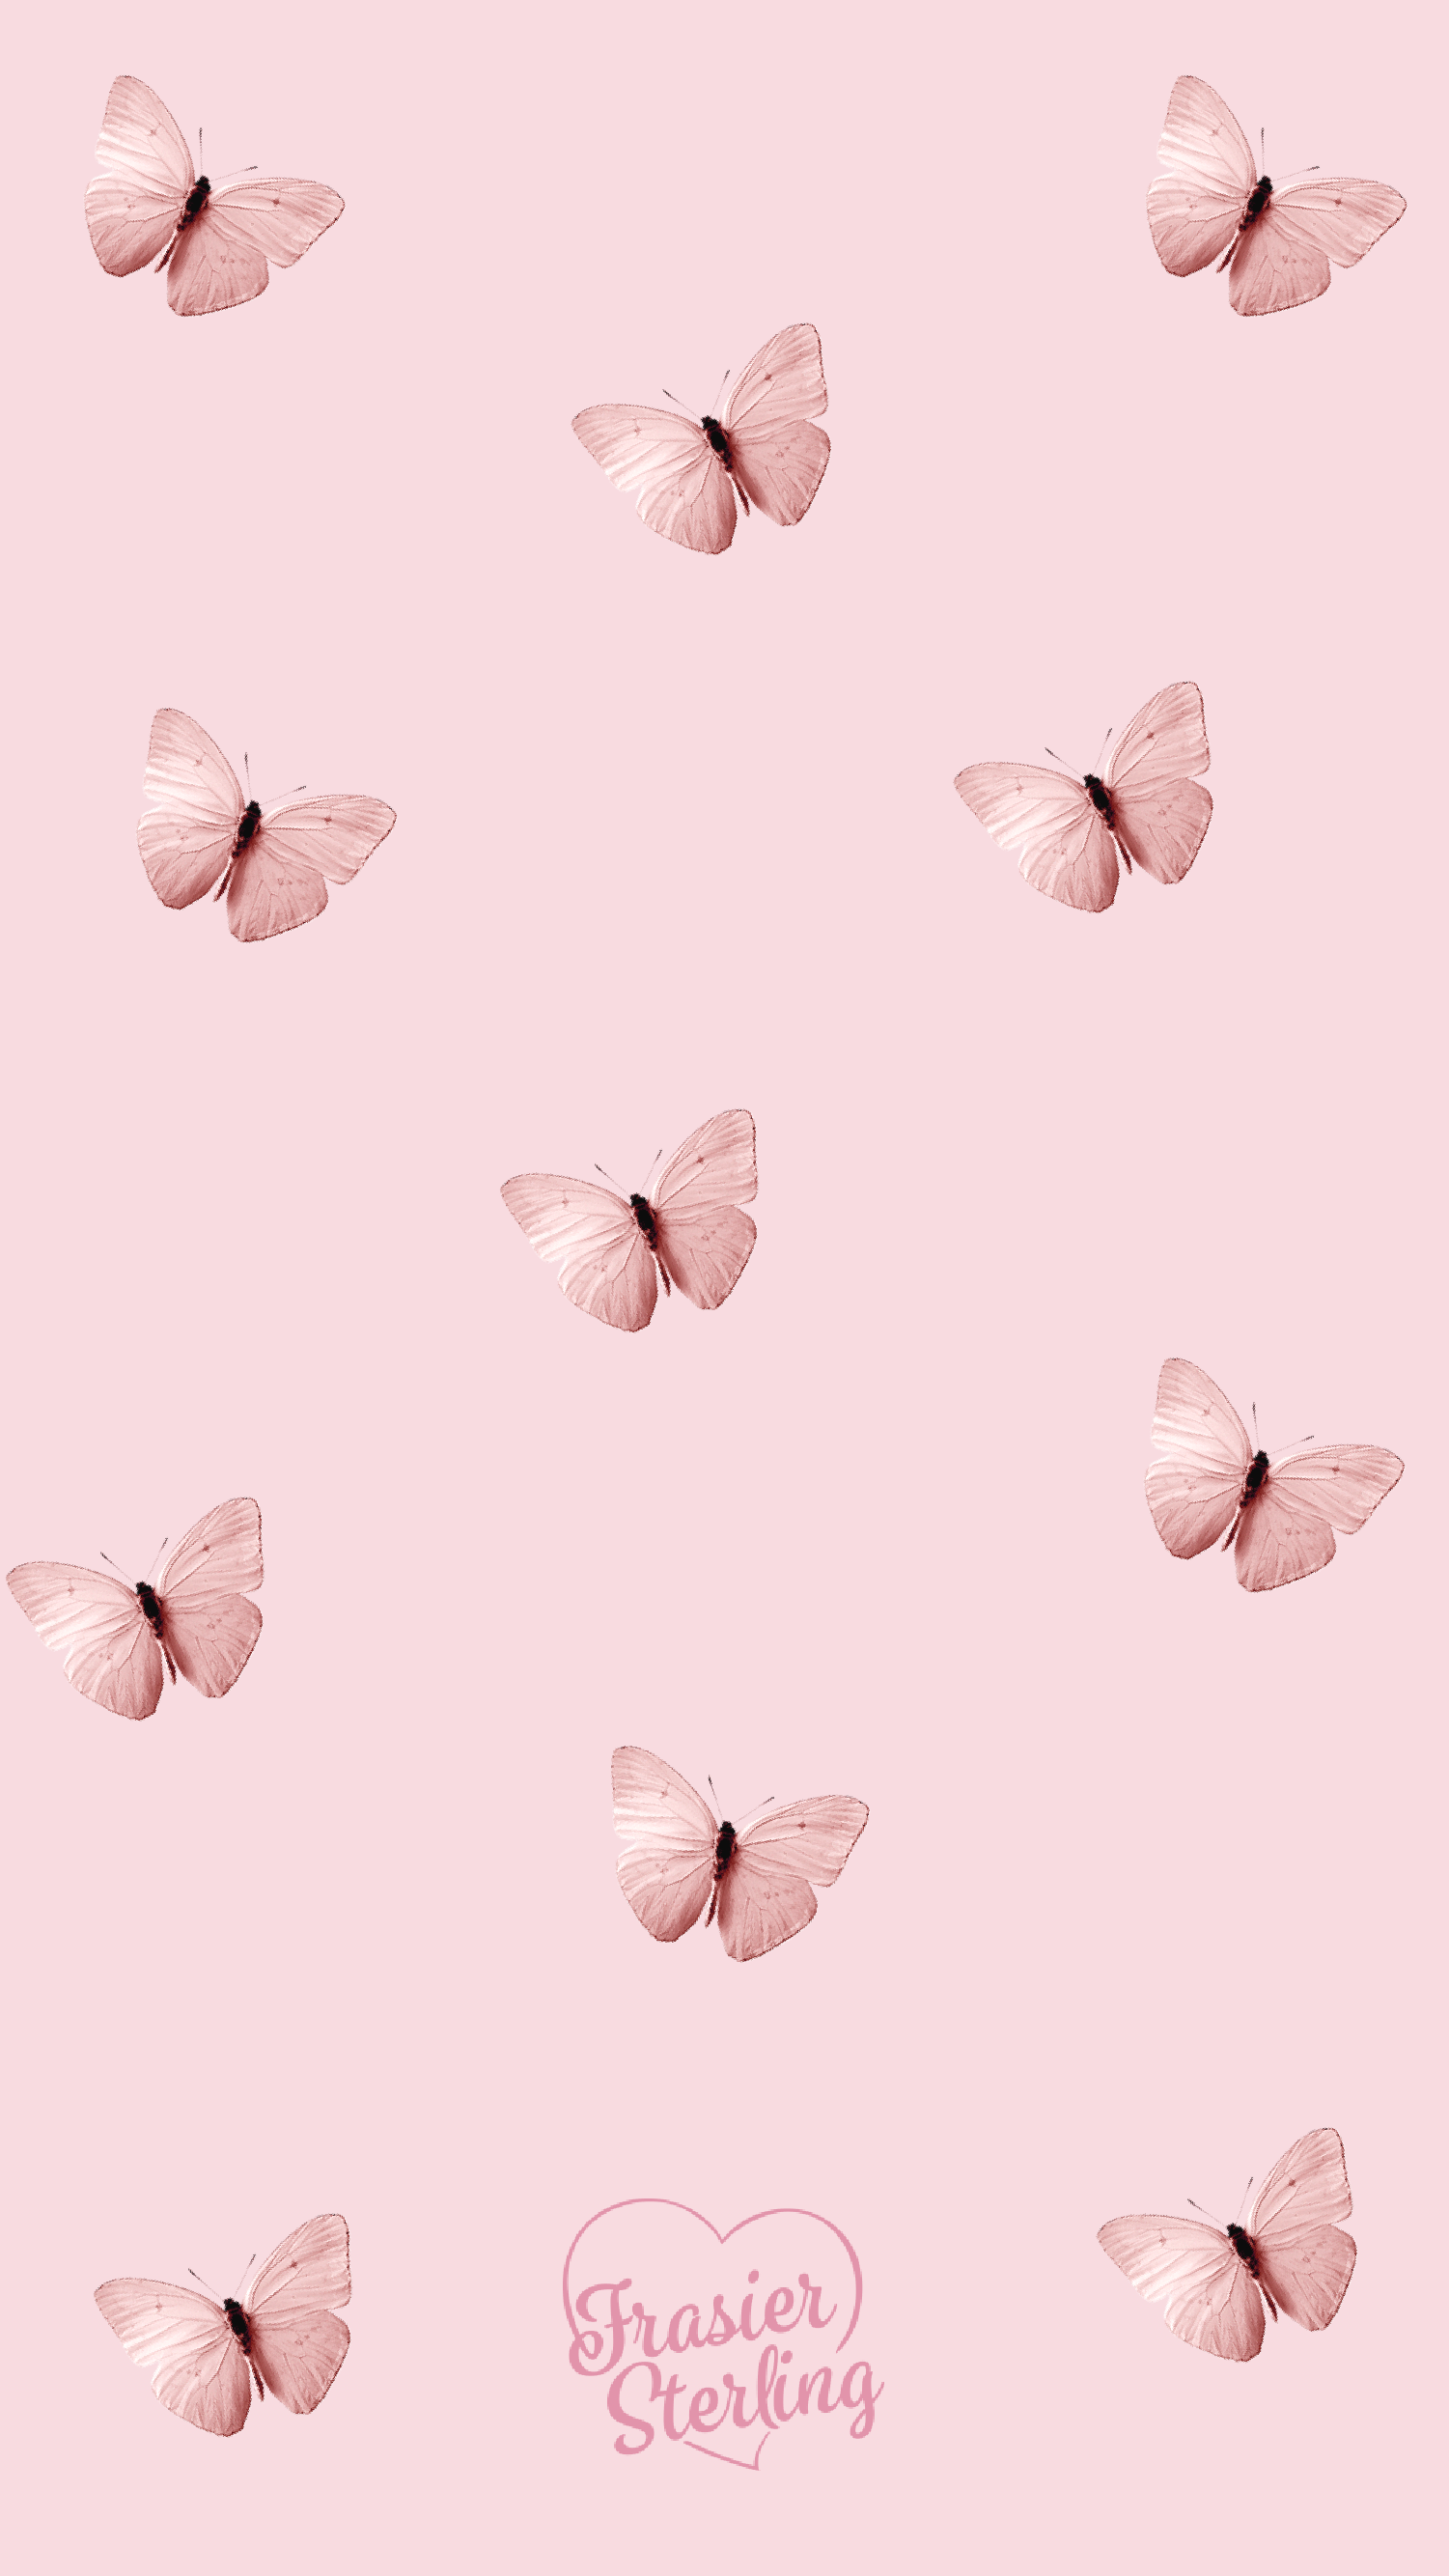 Butterfly wallpaper iphone, Aesthetic .com